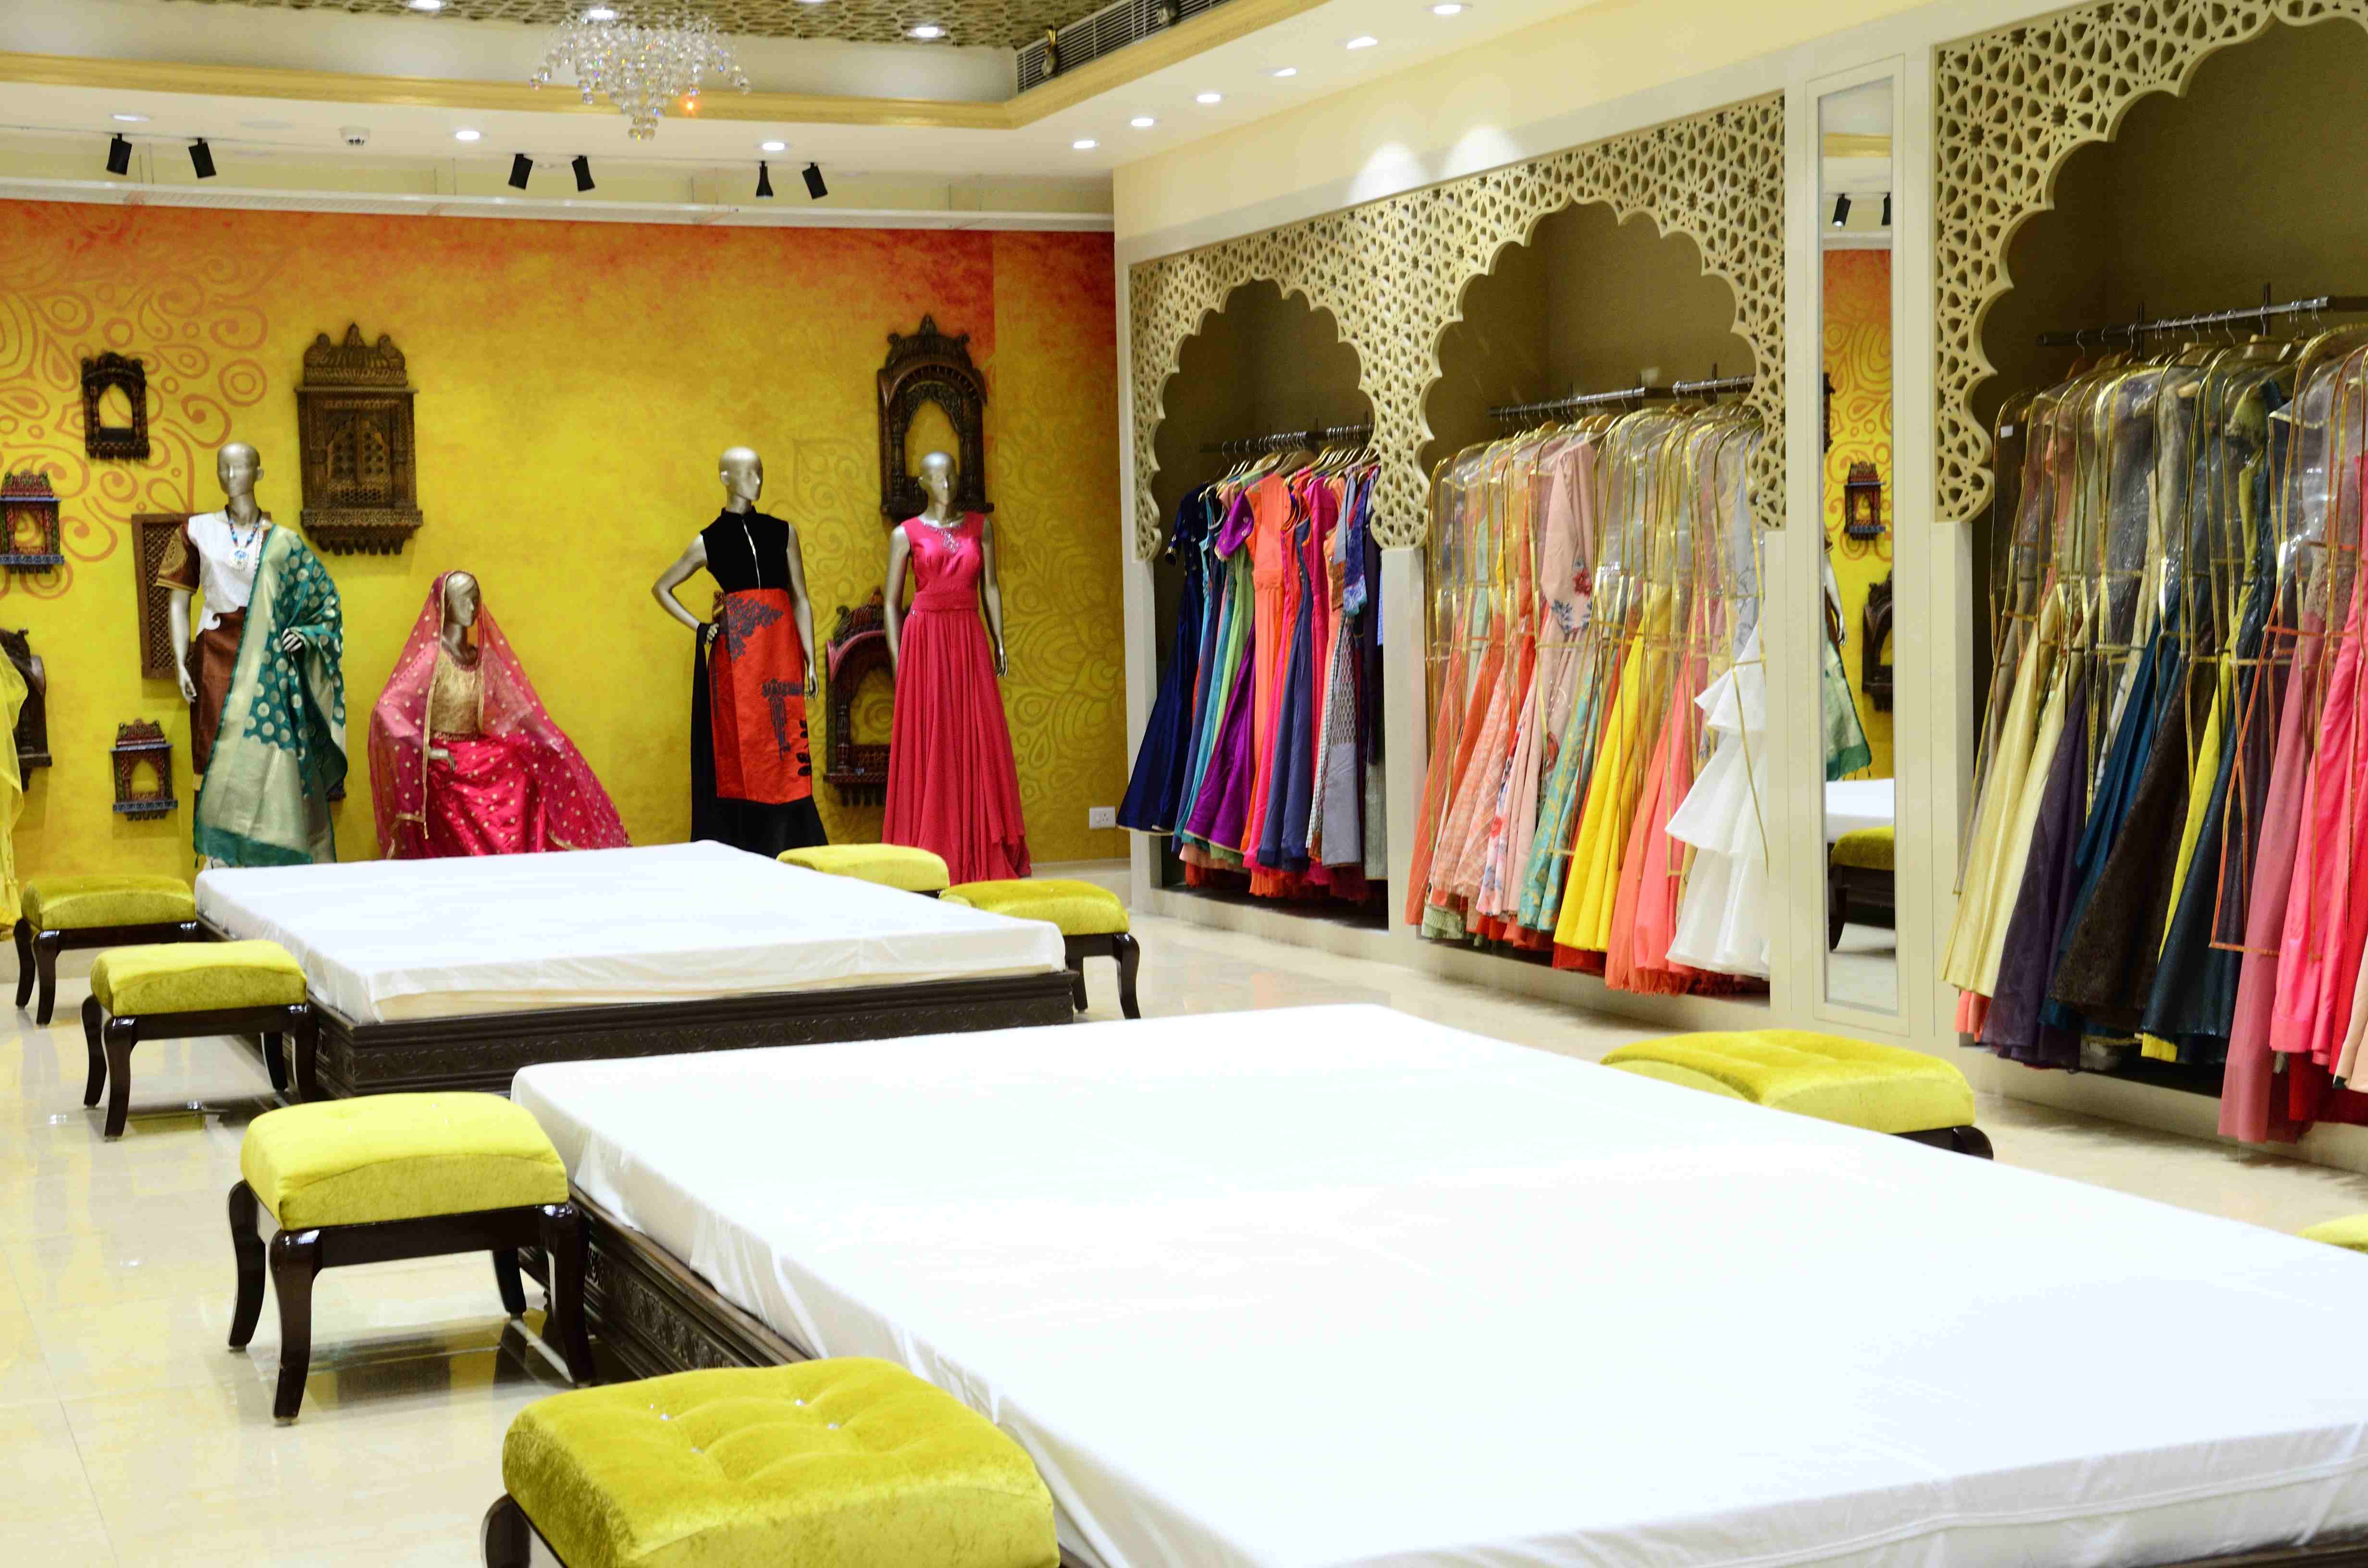 iraivi wedding and party wear store